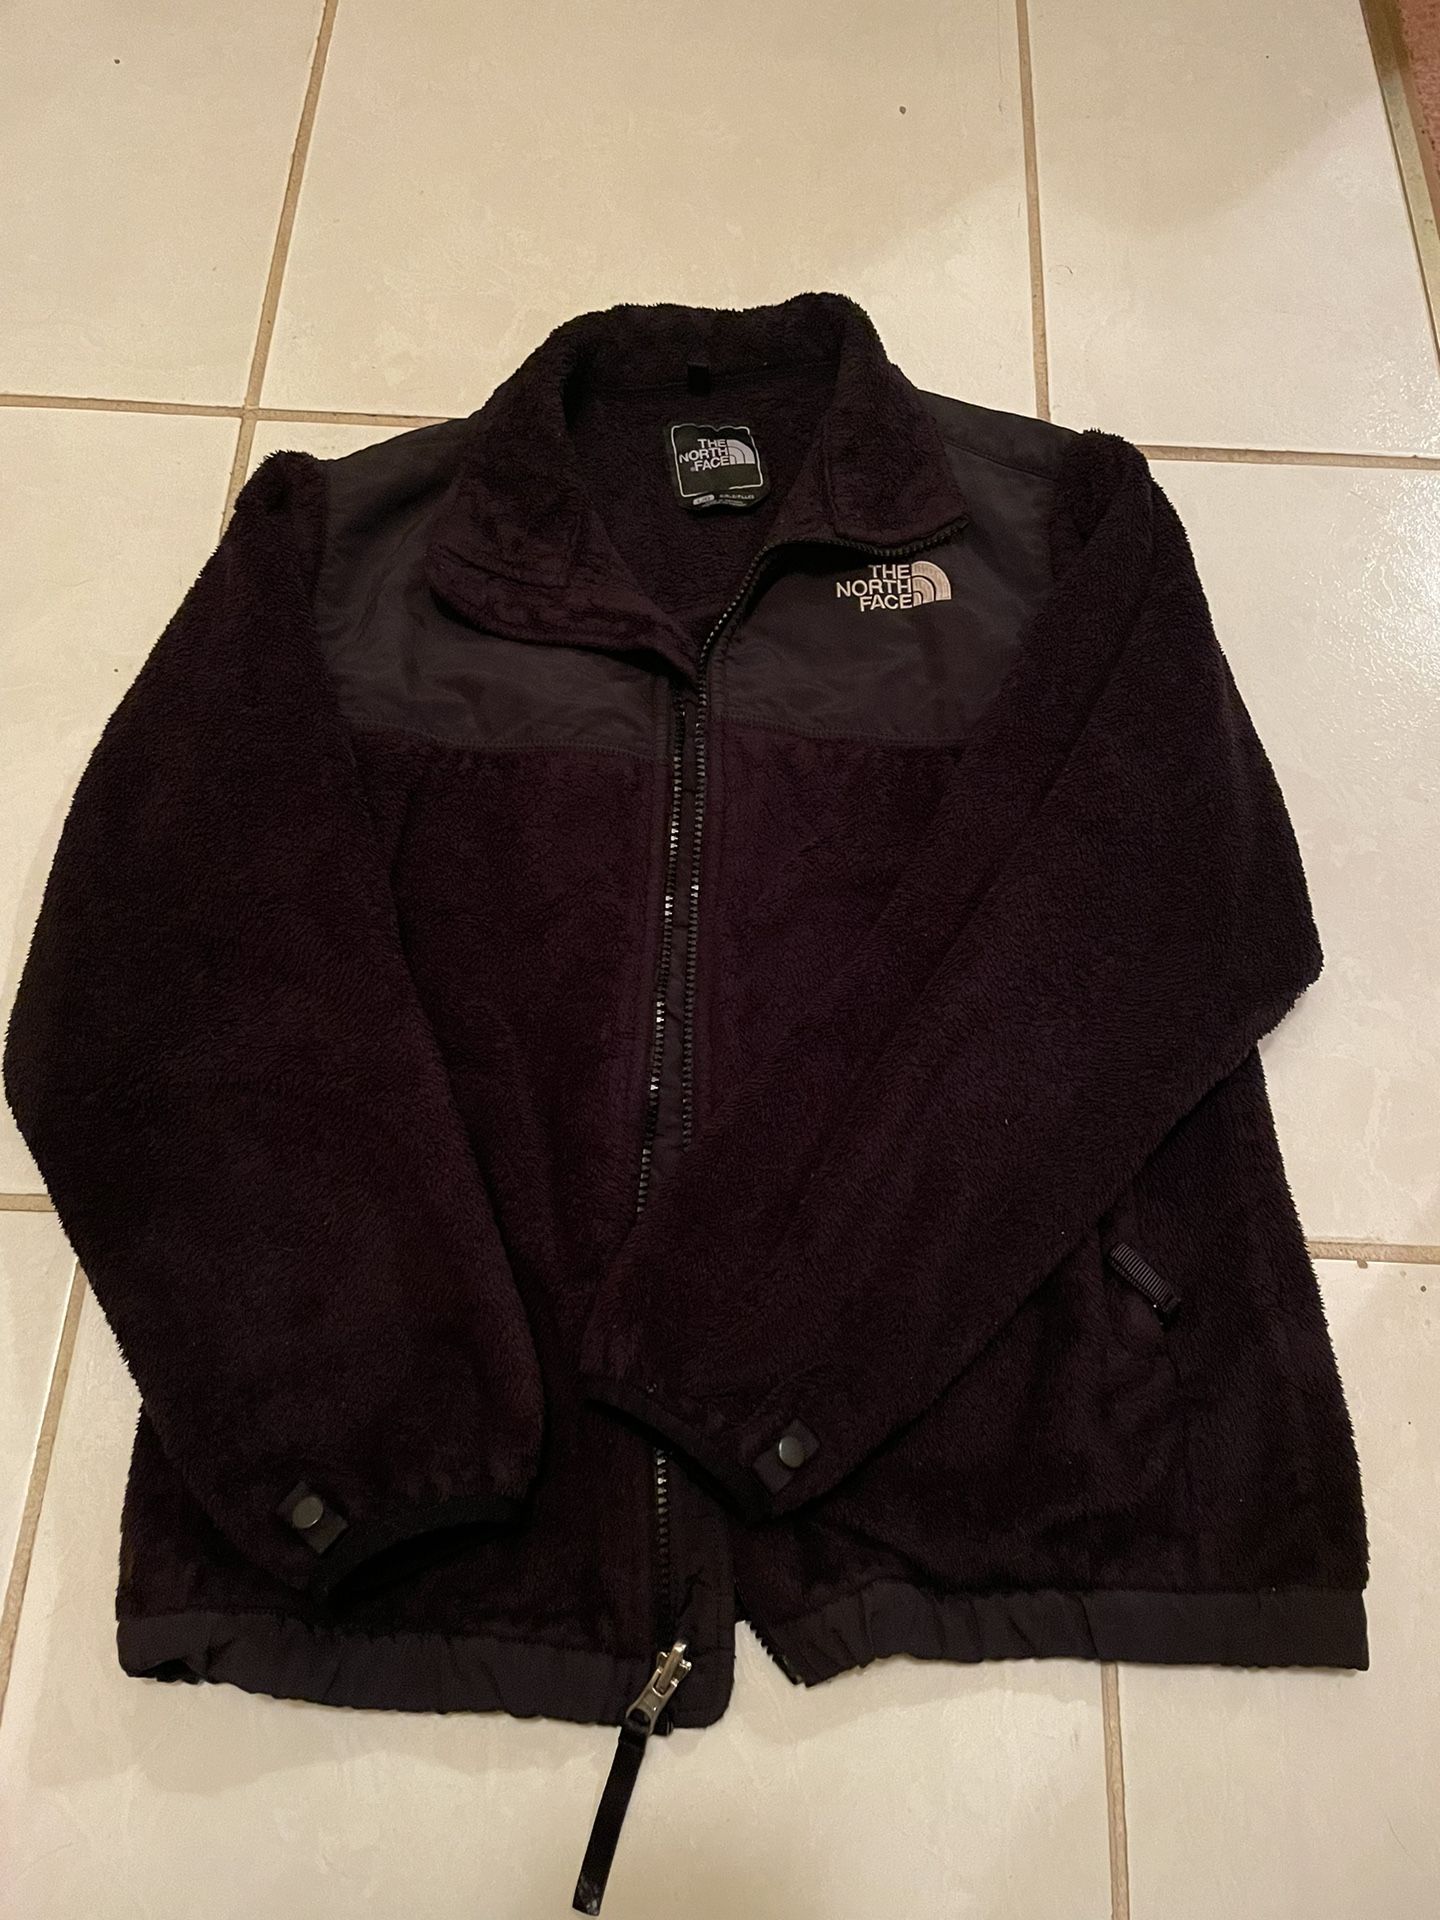 North face Girls Size Small Jacket 